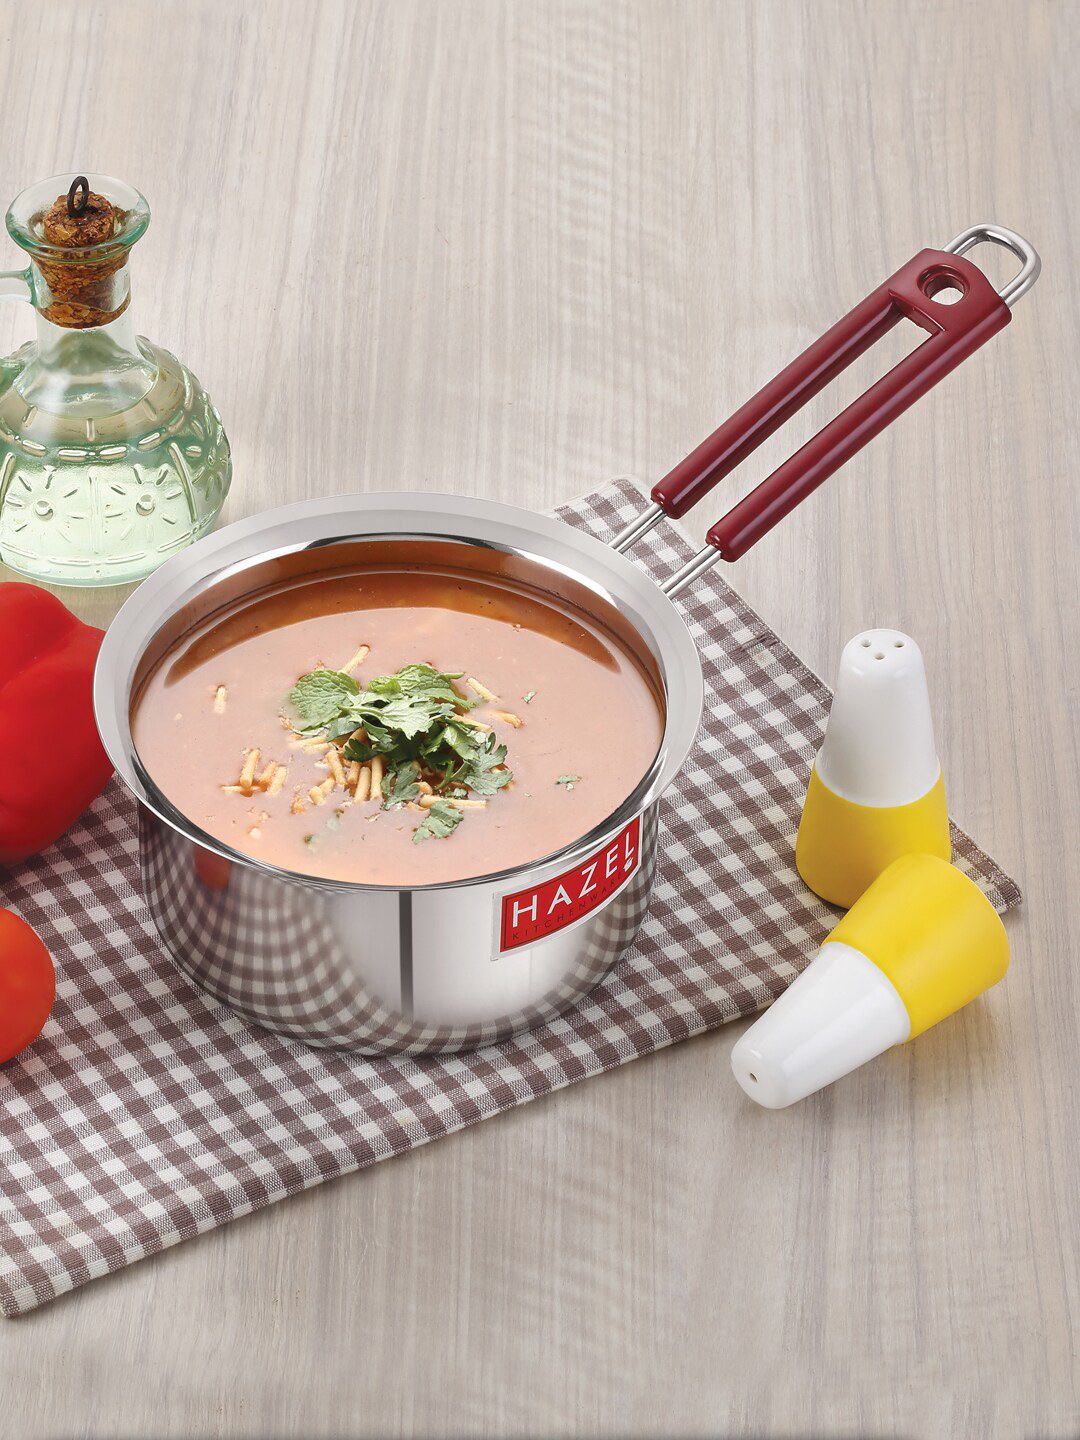 HAZEL Silver-Toned Solid Stainless Steel Sauce Pan Price in India